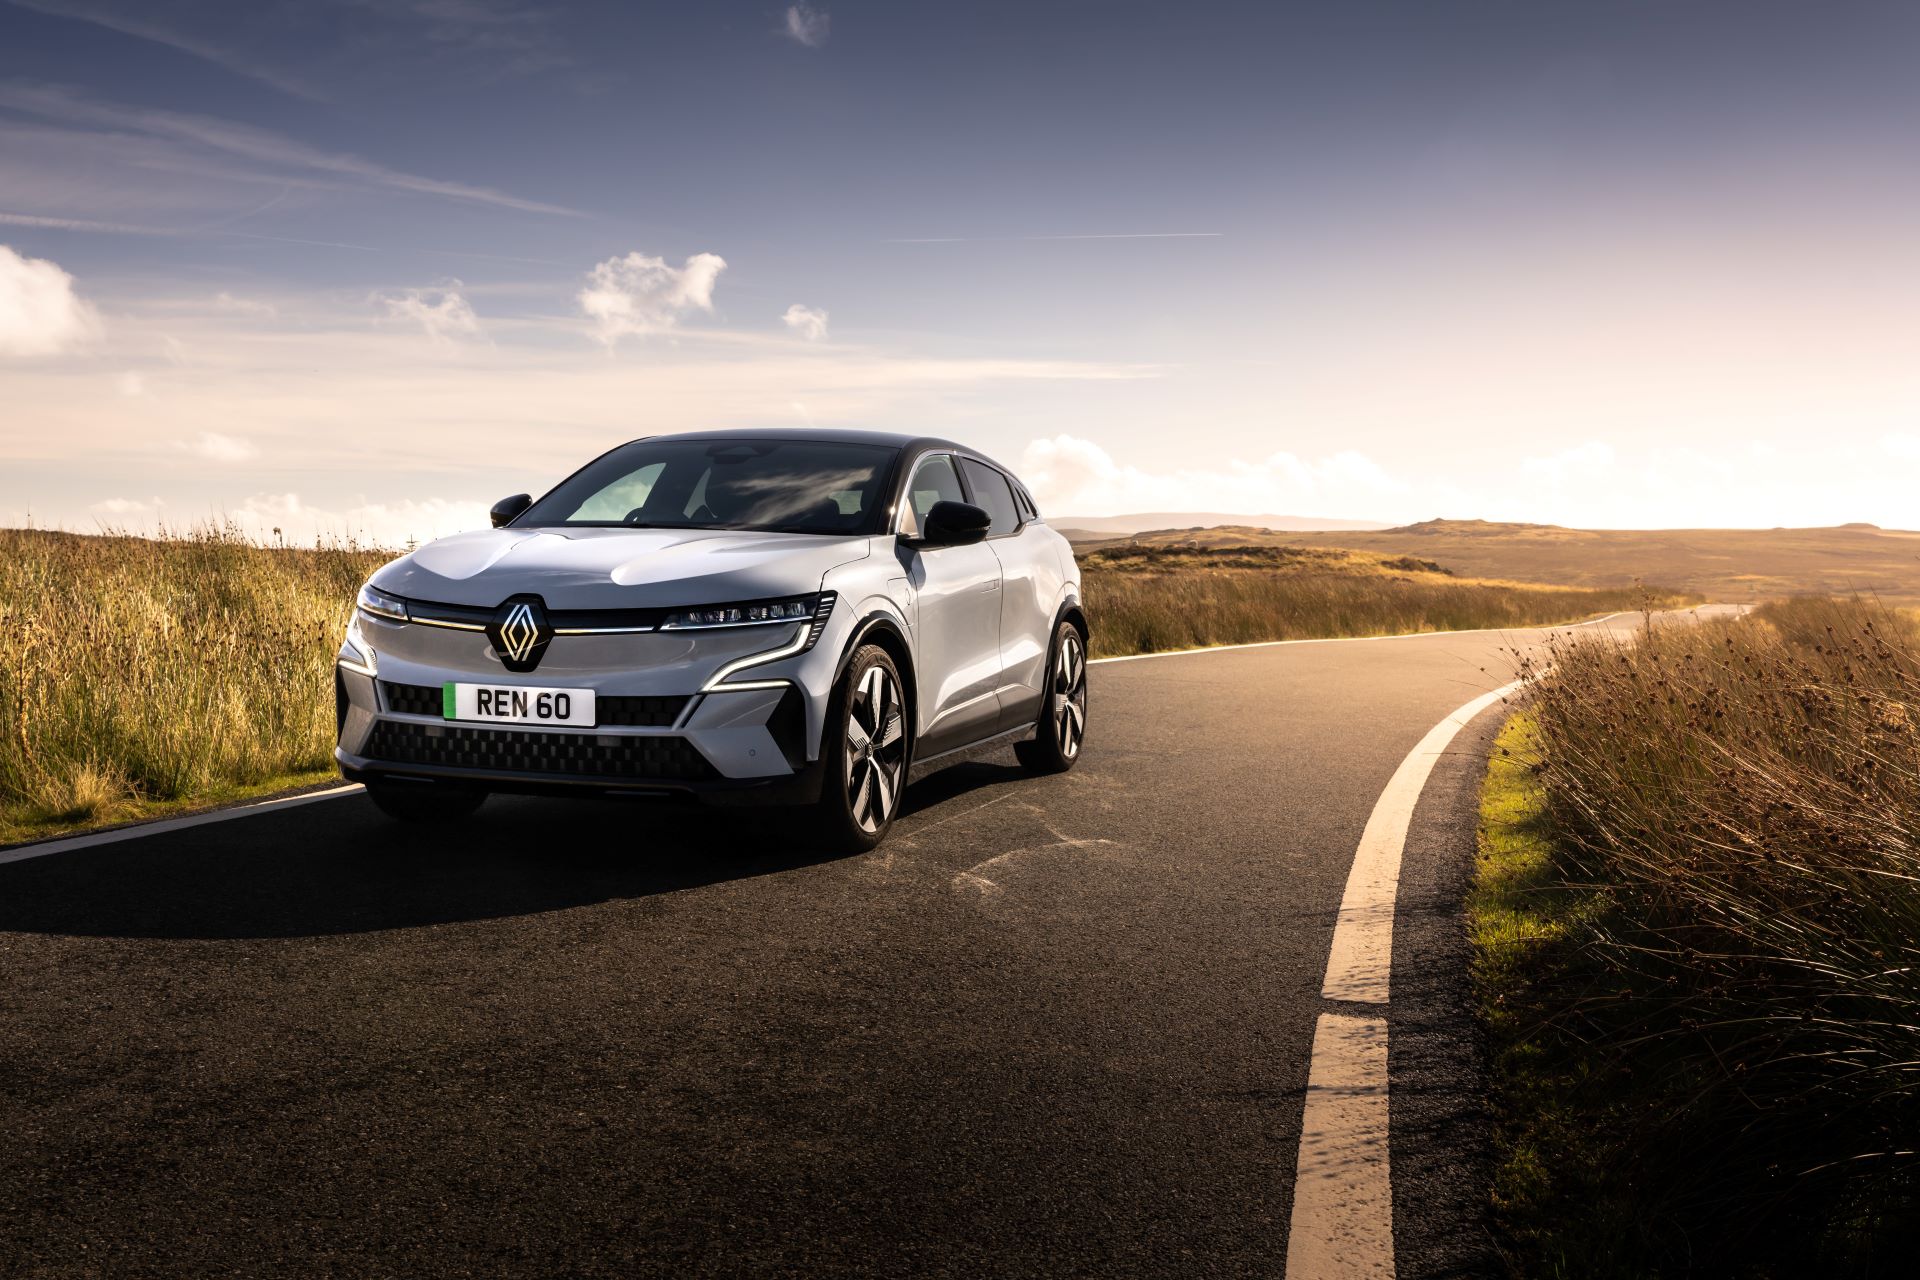 Enhanced and More Affordable: The New Renault Megane E-Tech Electric